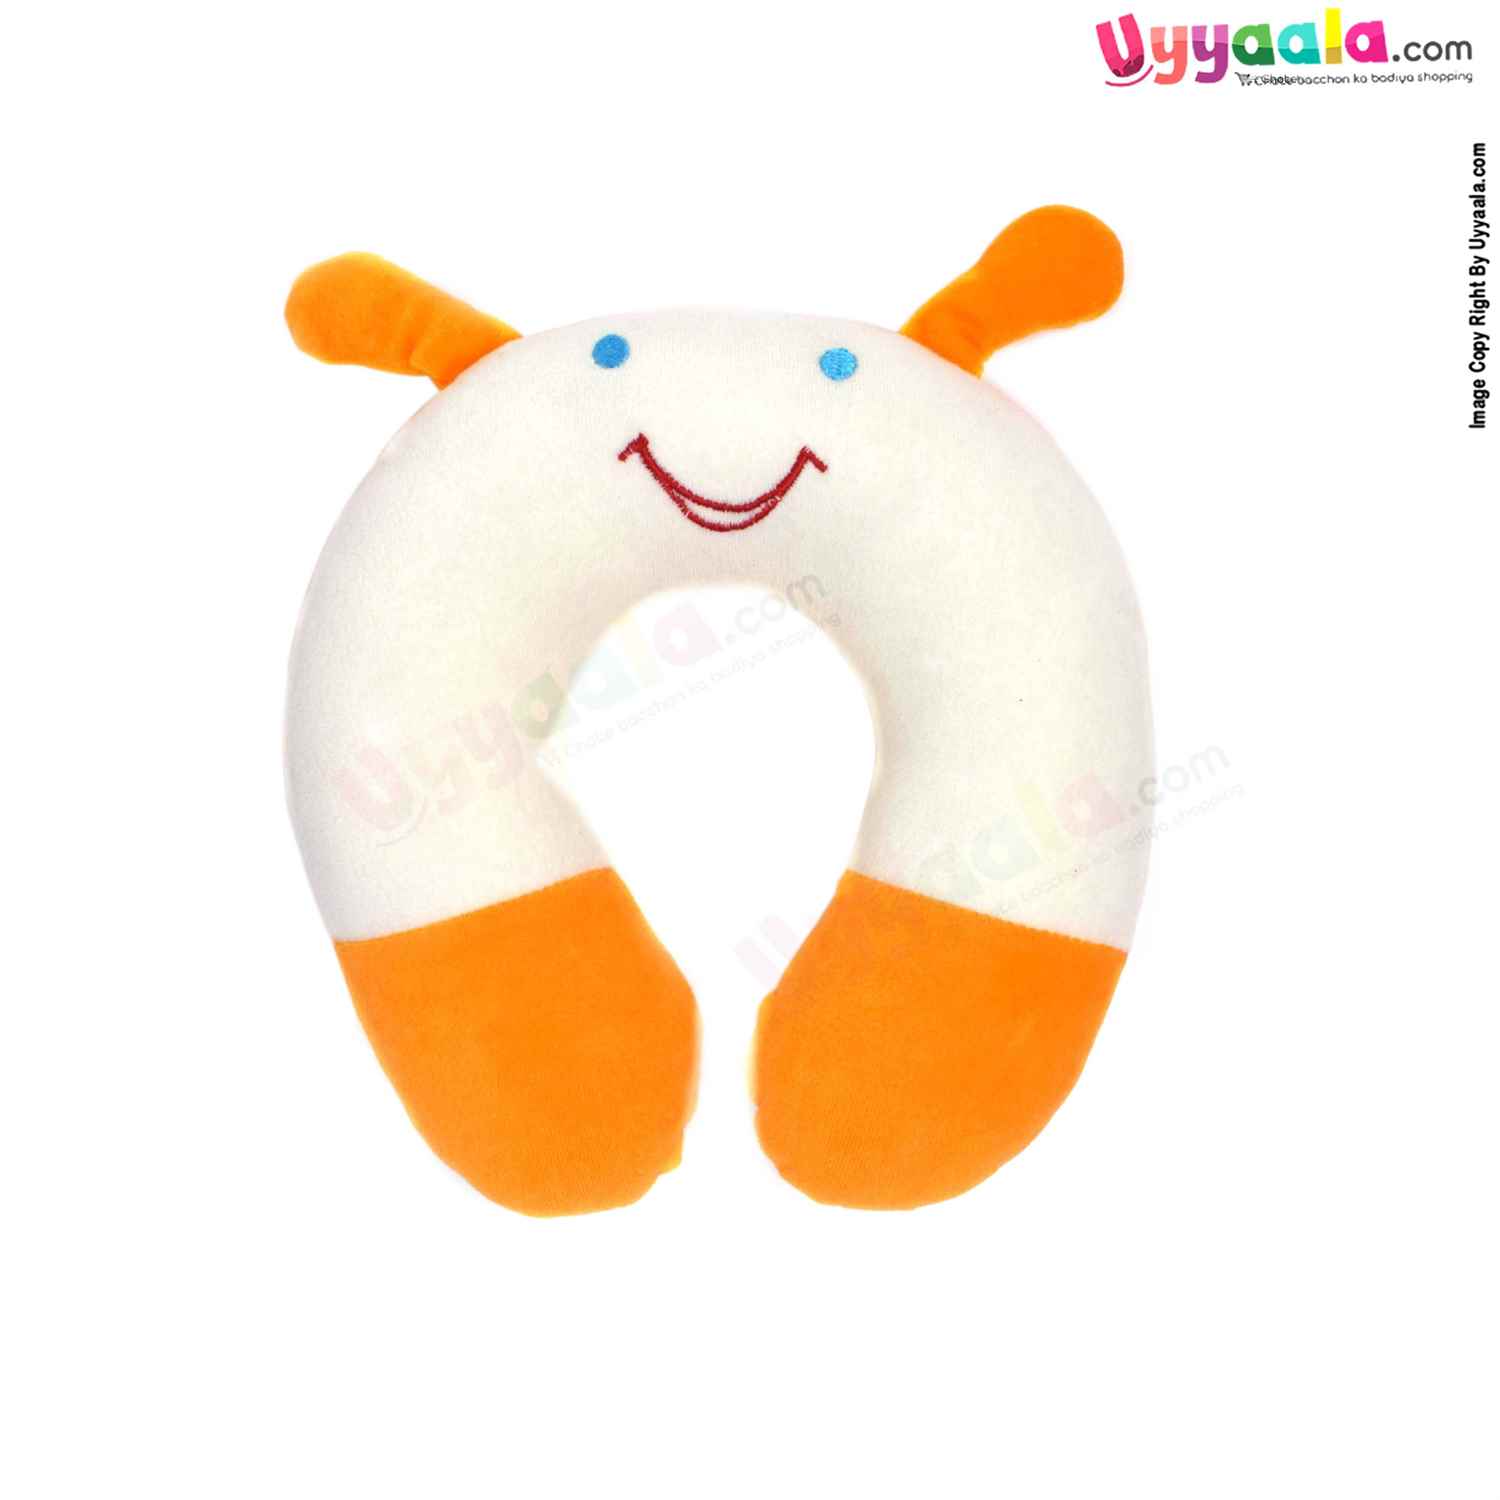 Baby Neck Pillow Cotton Horse -Shoe Shaped for Babies with Cartoon Character 0+m Age, Size(27*19cm)